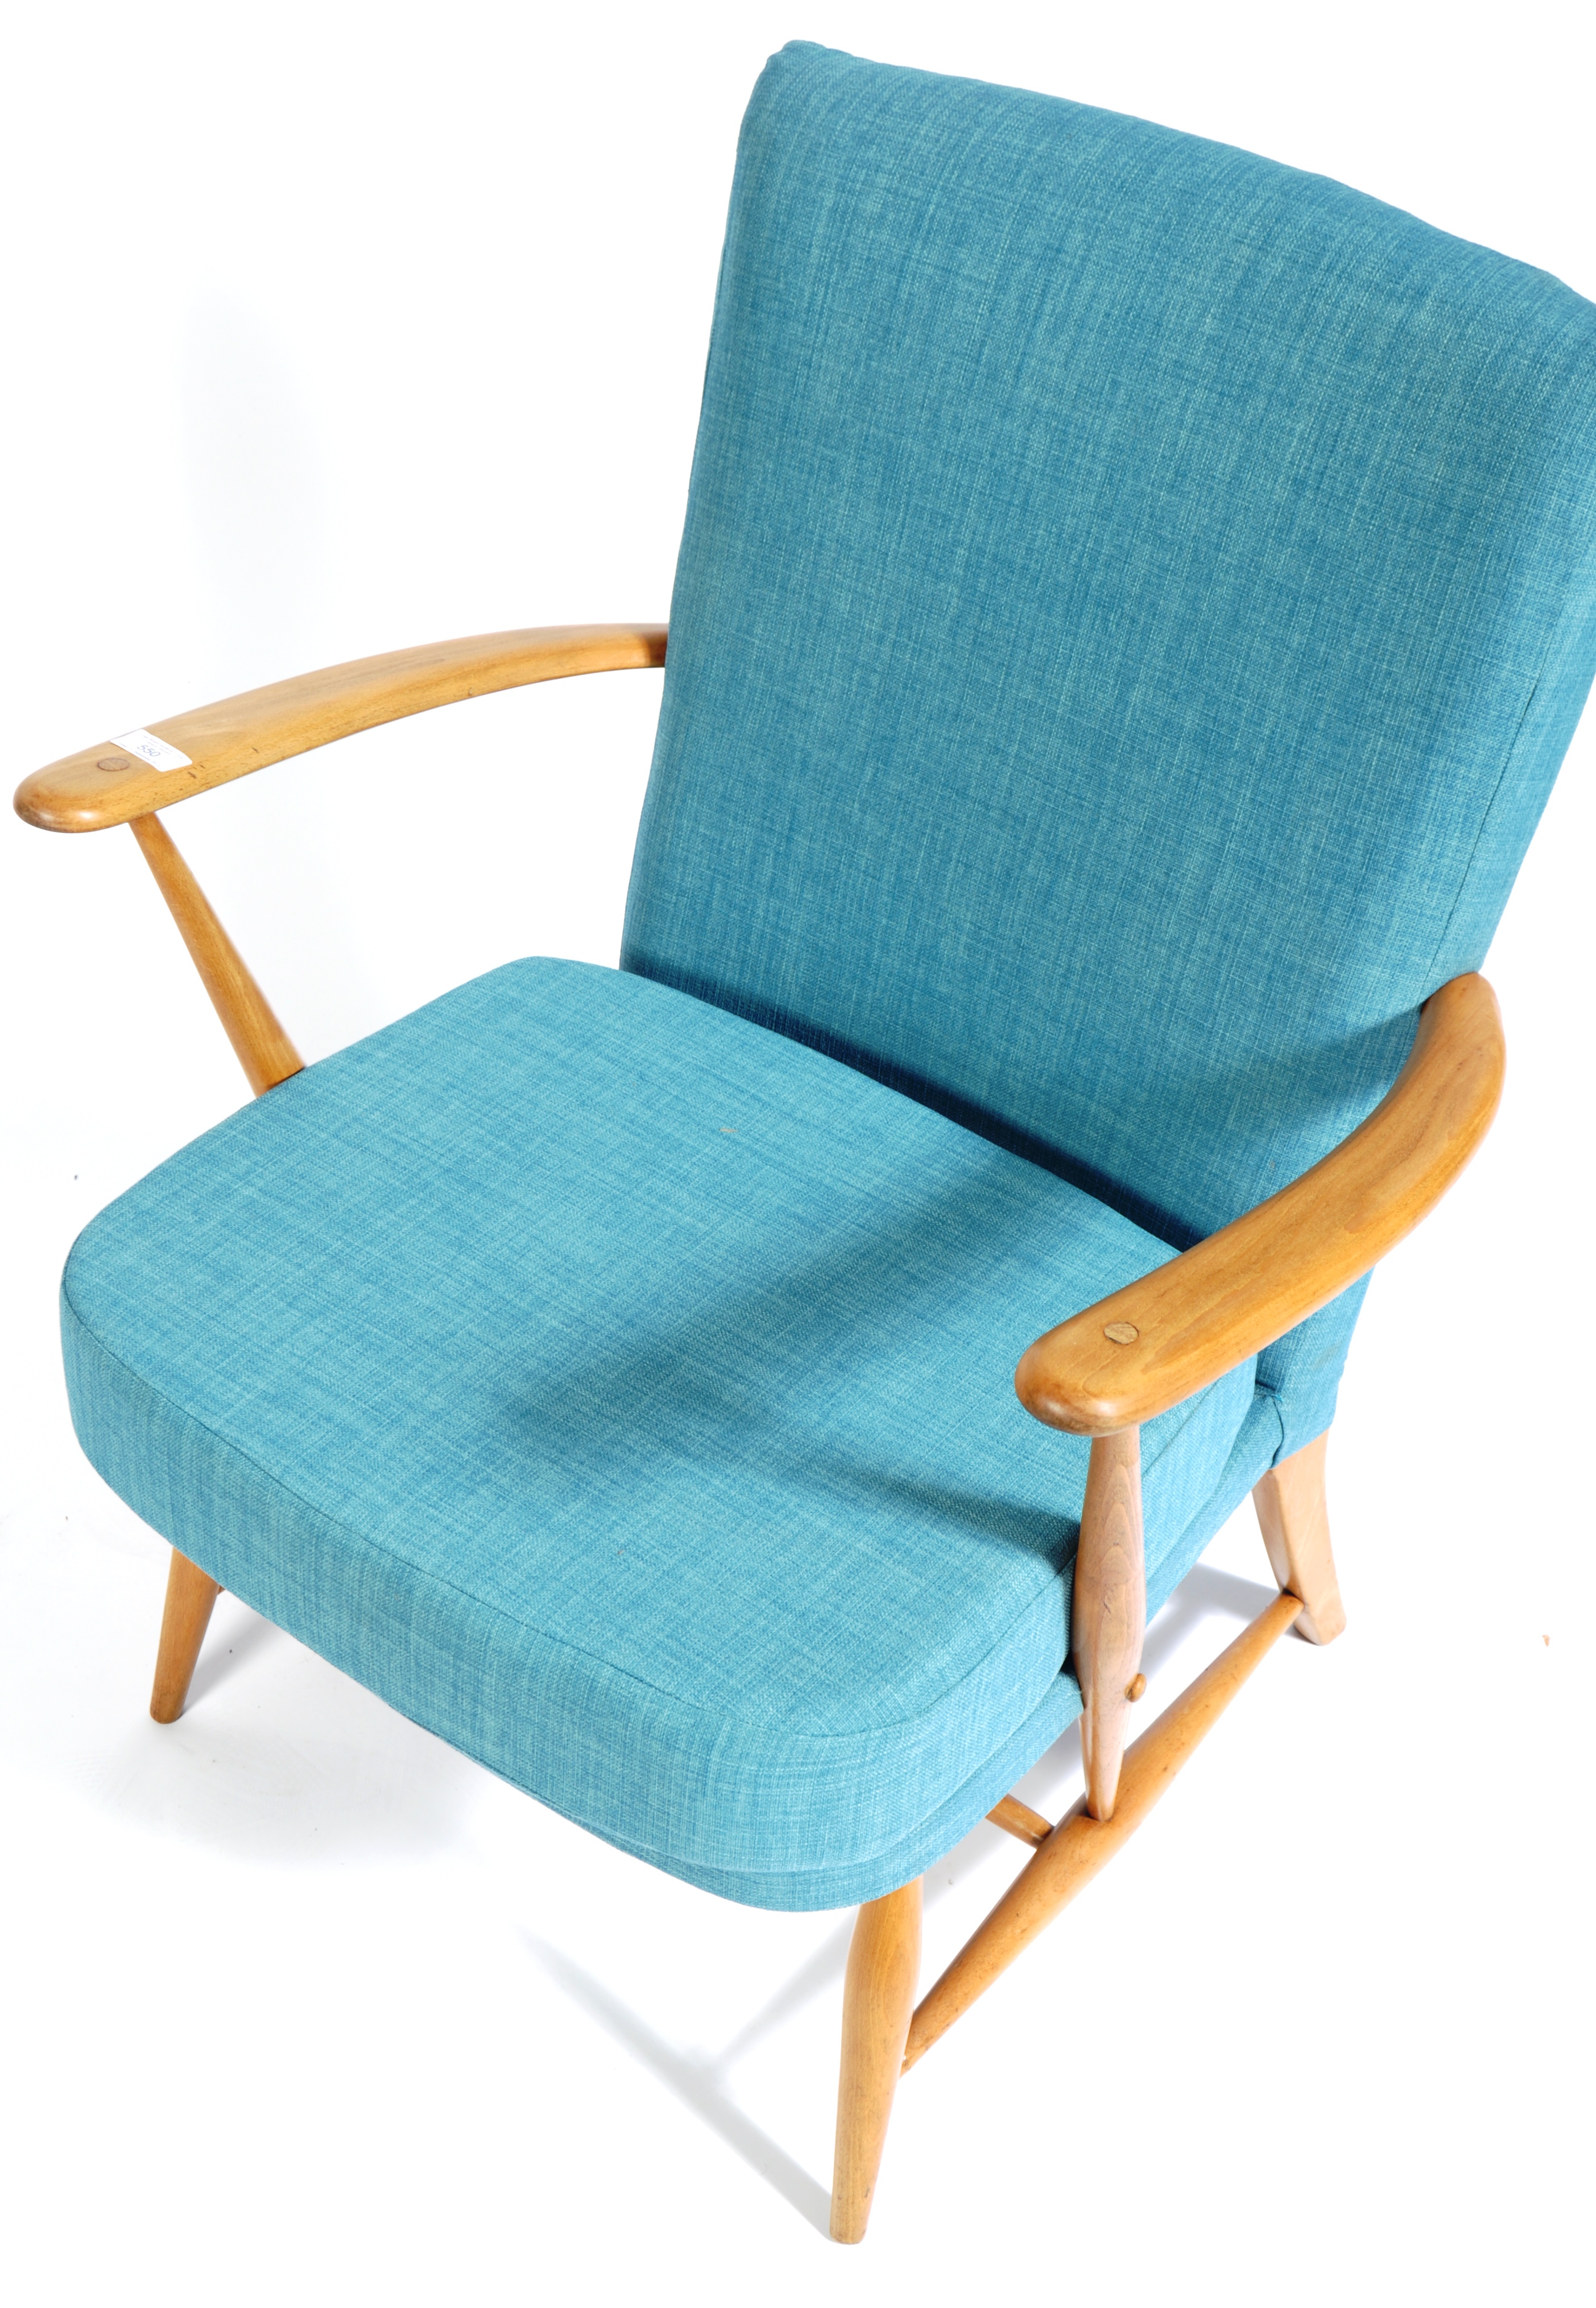 ERCOL MODEL 248 1950'S BEECH AND ELM LOUNGE CHAIR BY L. ERCOLANI - Image 2 of 6